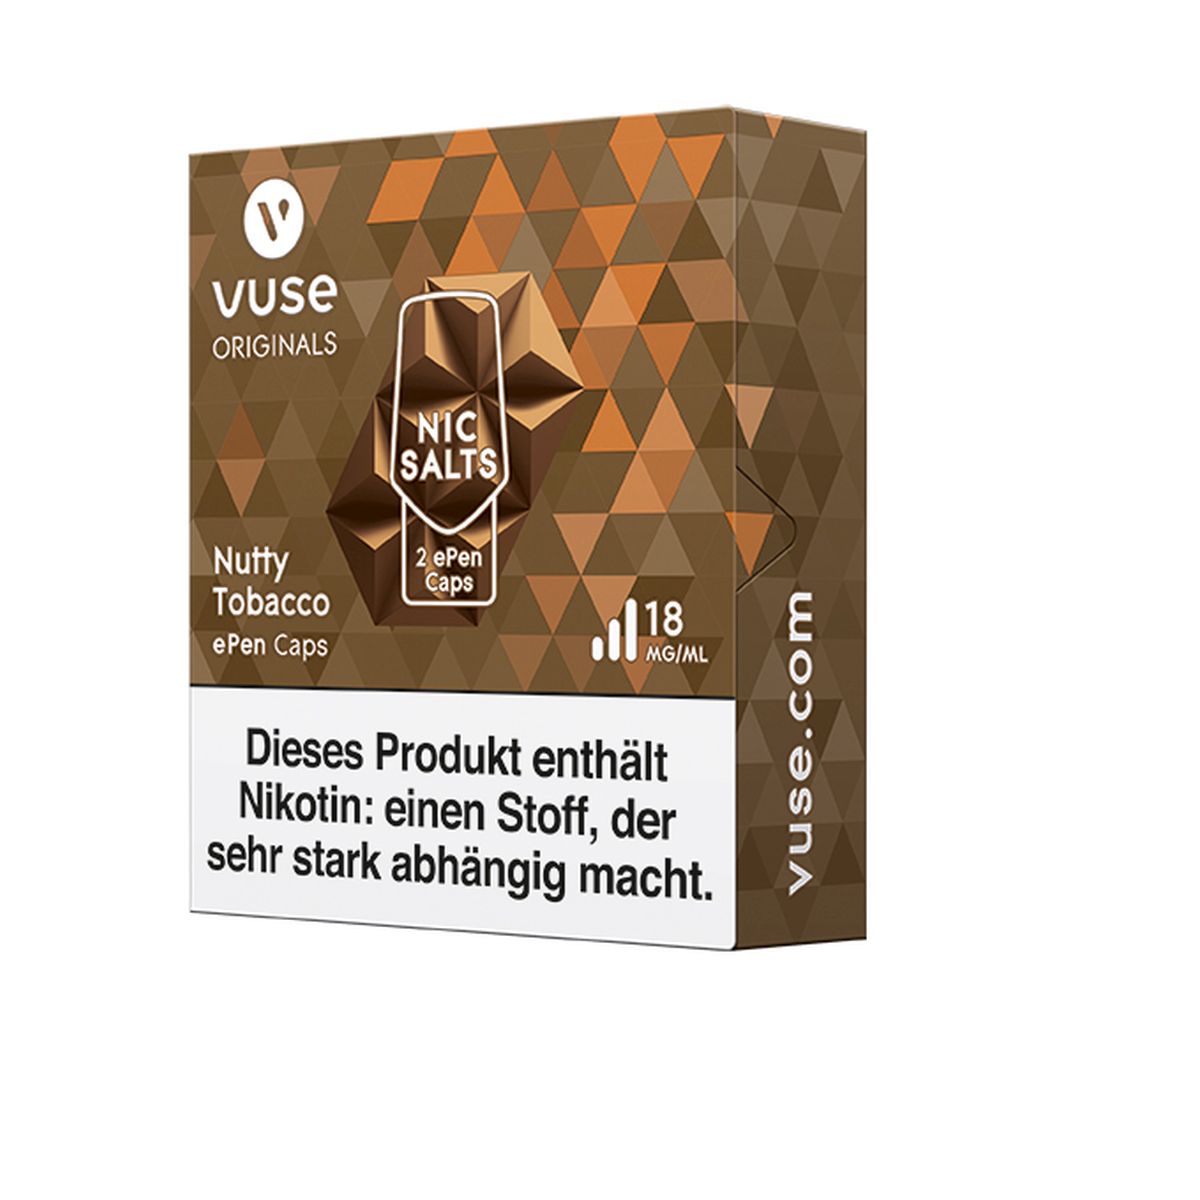 Vuse Vuse ePen Caps Nutty Tobacco Nic Salts 18mg Nikotin 2ml bei www.Tabakring.de kaufen